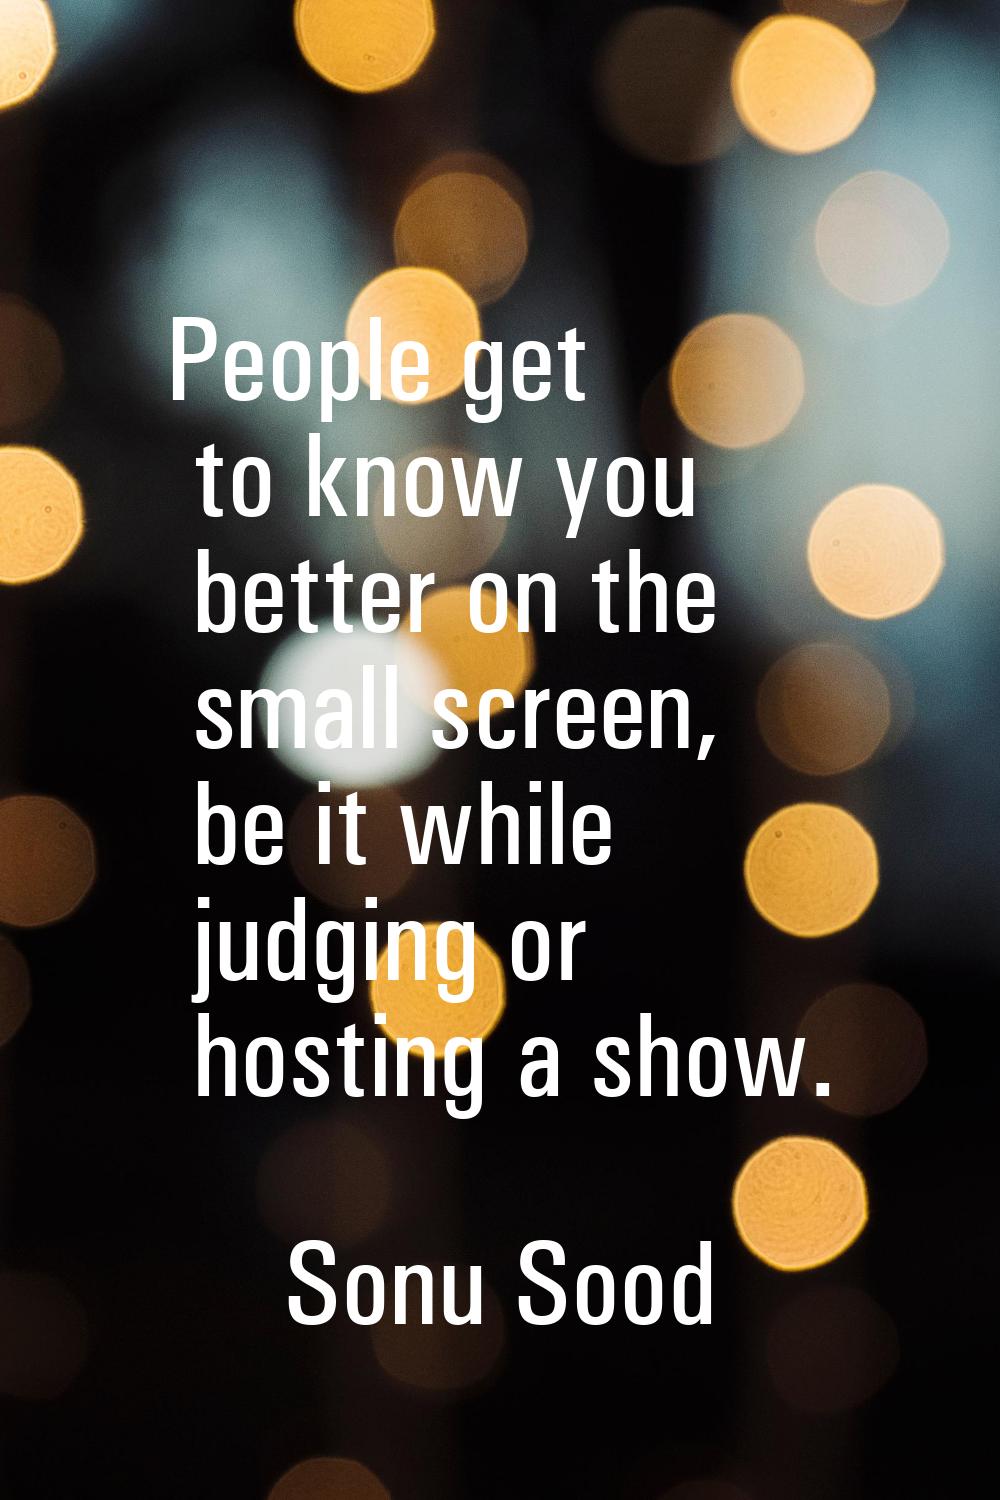 People get to know you better on the small screen, be it while judging or hosting a show.